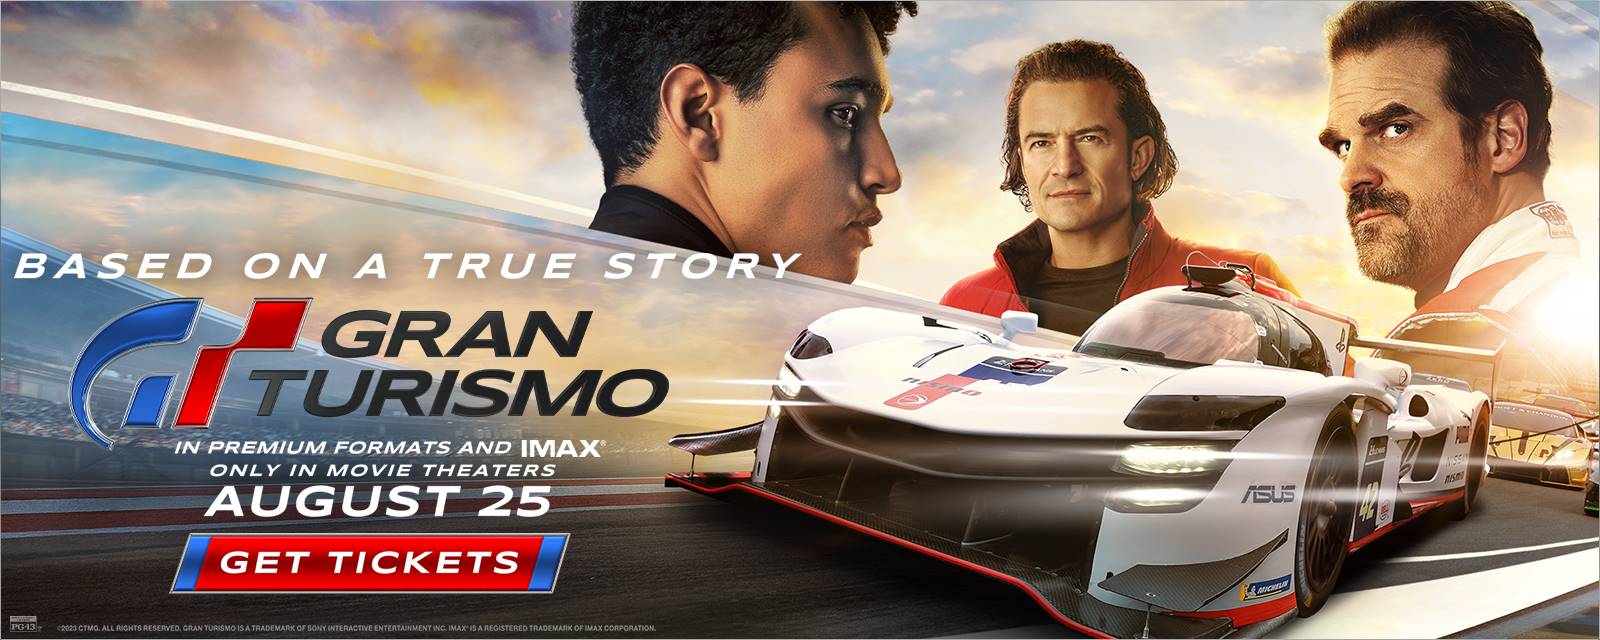 GRAN TURISMO: BASED ON A TRUE STORY